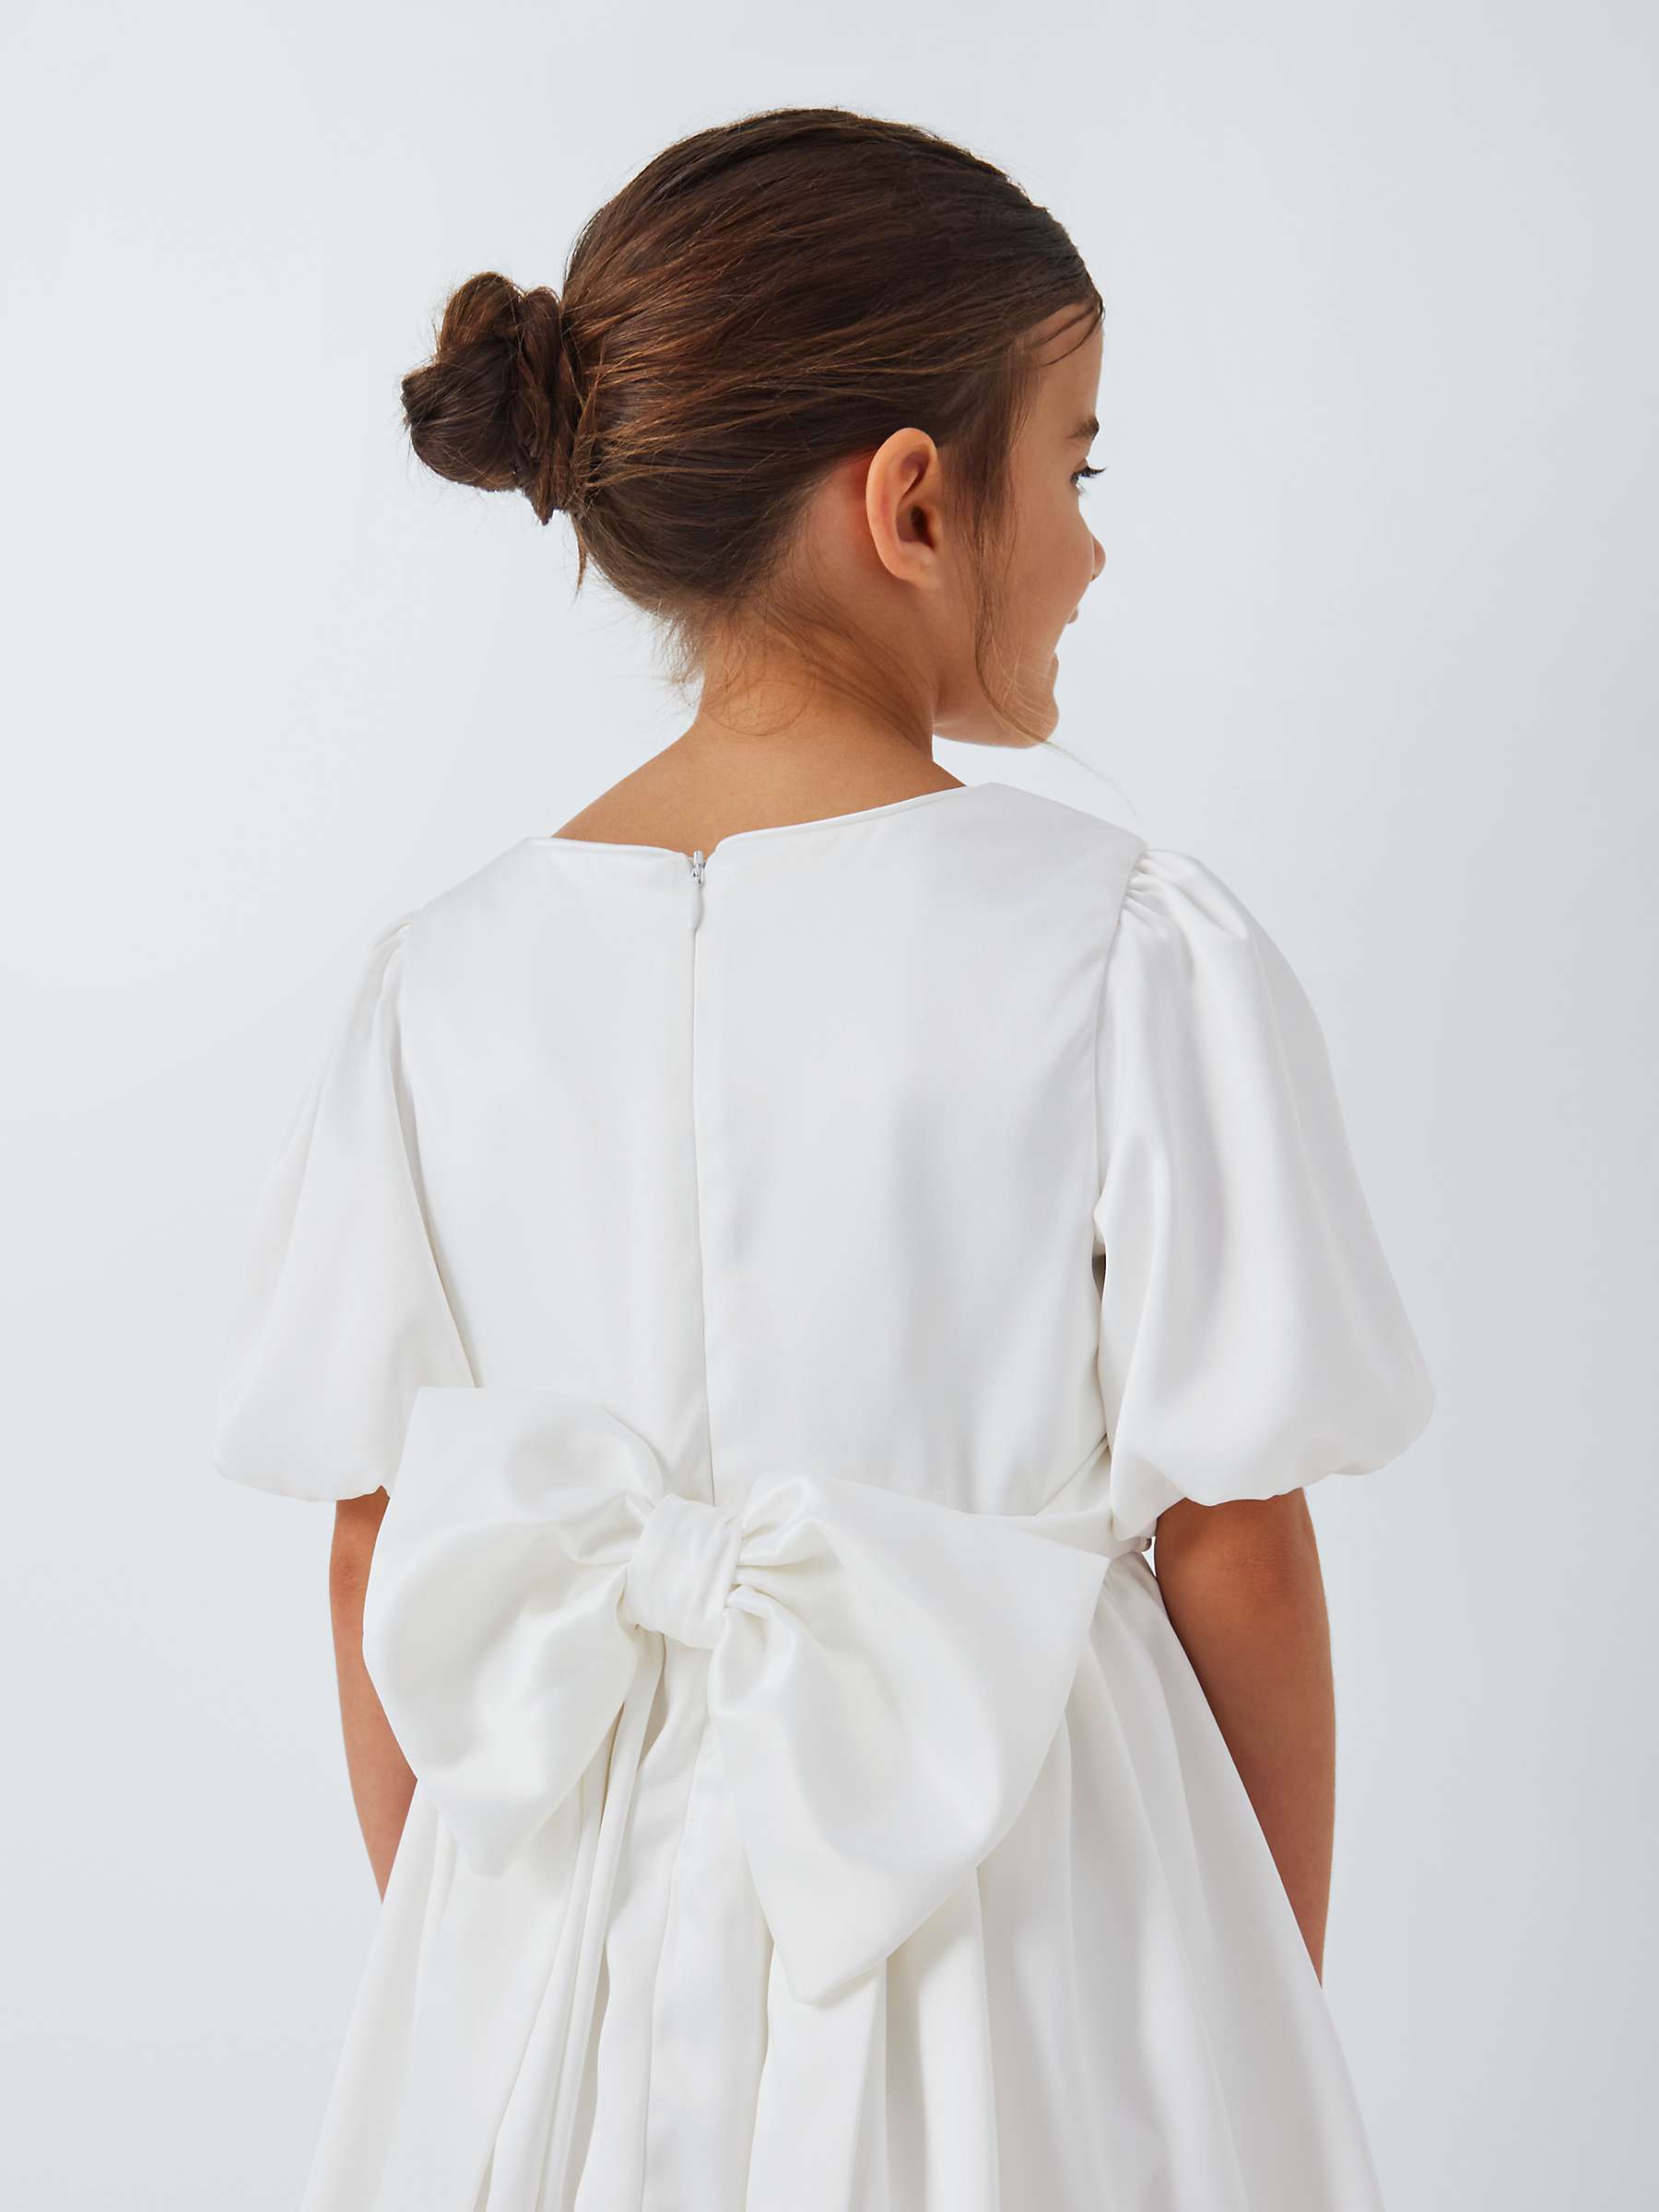 Buy John Lewis Heirloom Collection Kids' Bow Bridesmaid Dress, Ivory Online at johnlewis.com